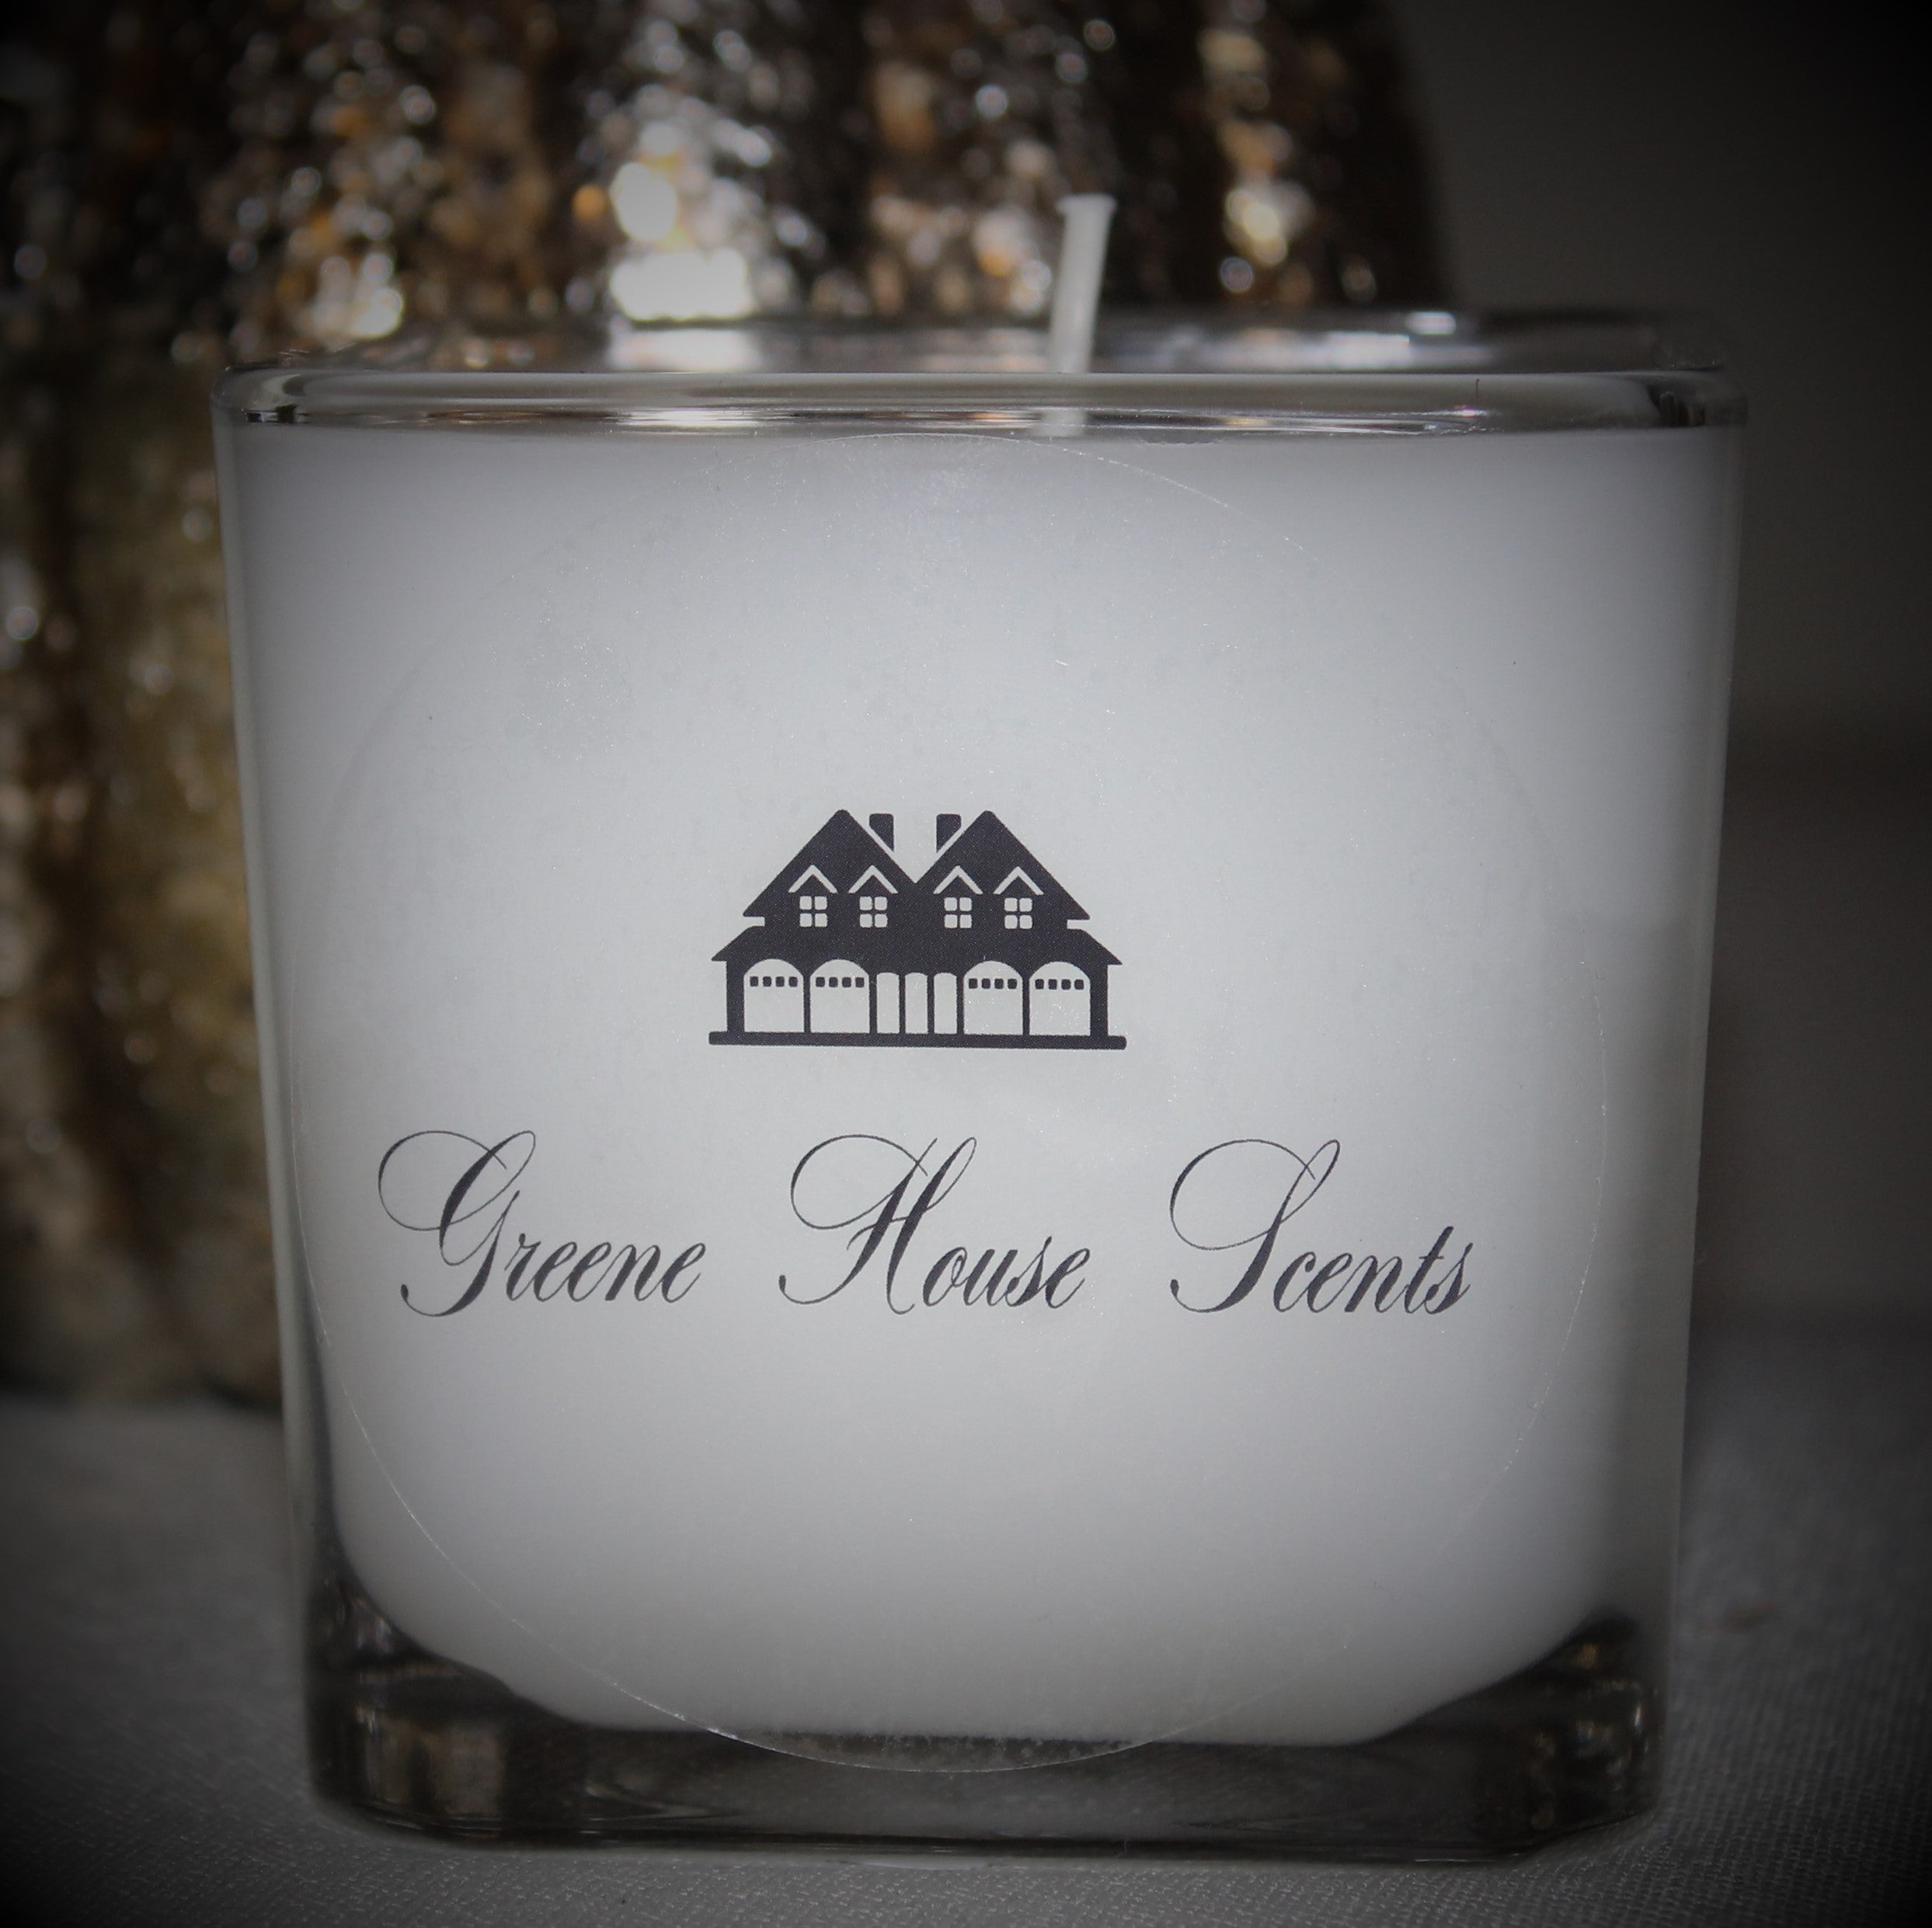 Cranberry Marmalade - Greene House Scents